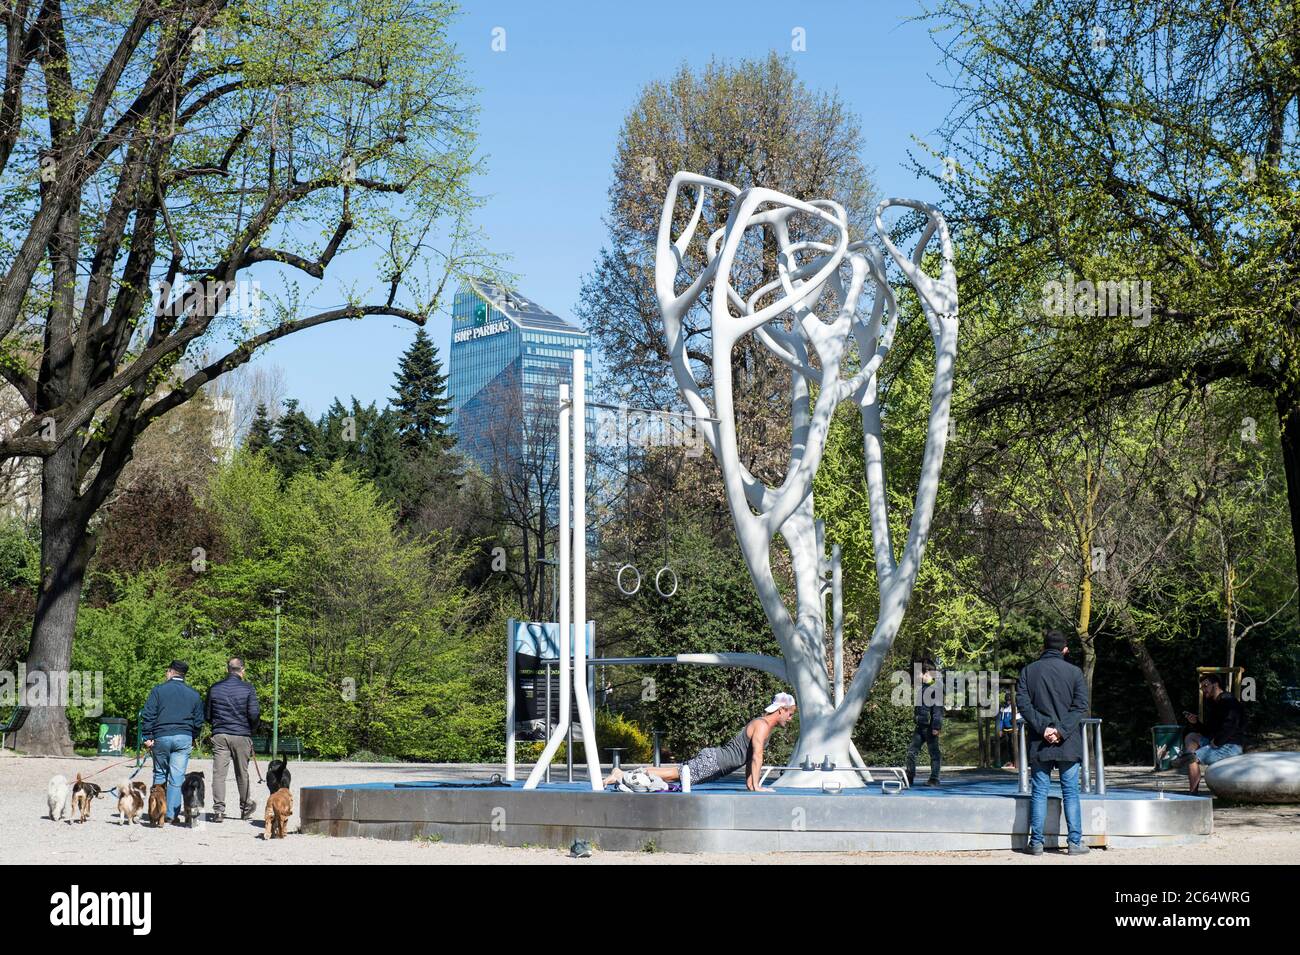 Italy, Lombardy, Milan, Indro Montanelli Gardens, Samsung Smart Fitness Stock Photo